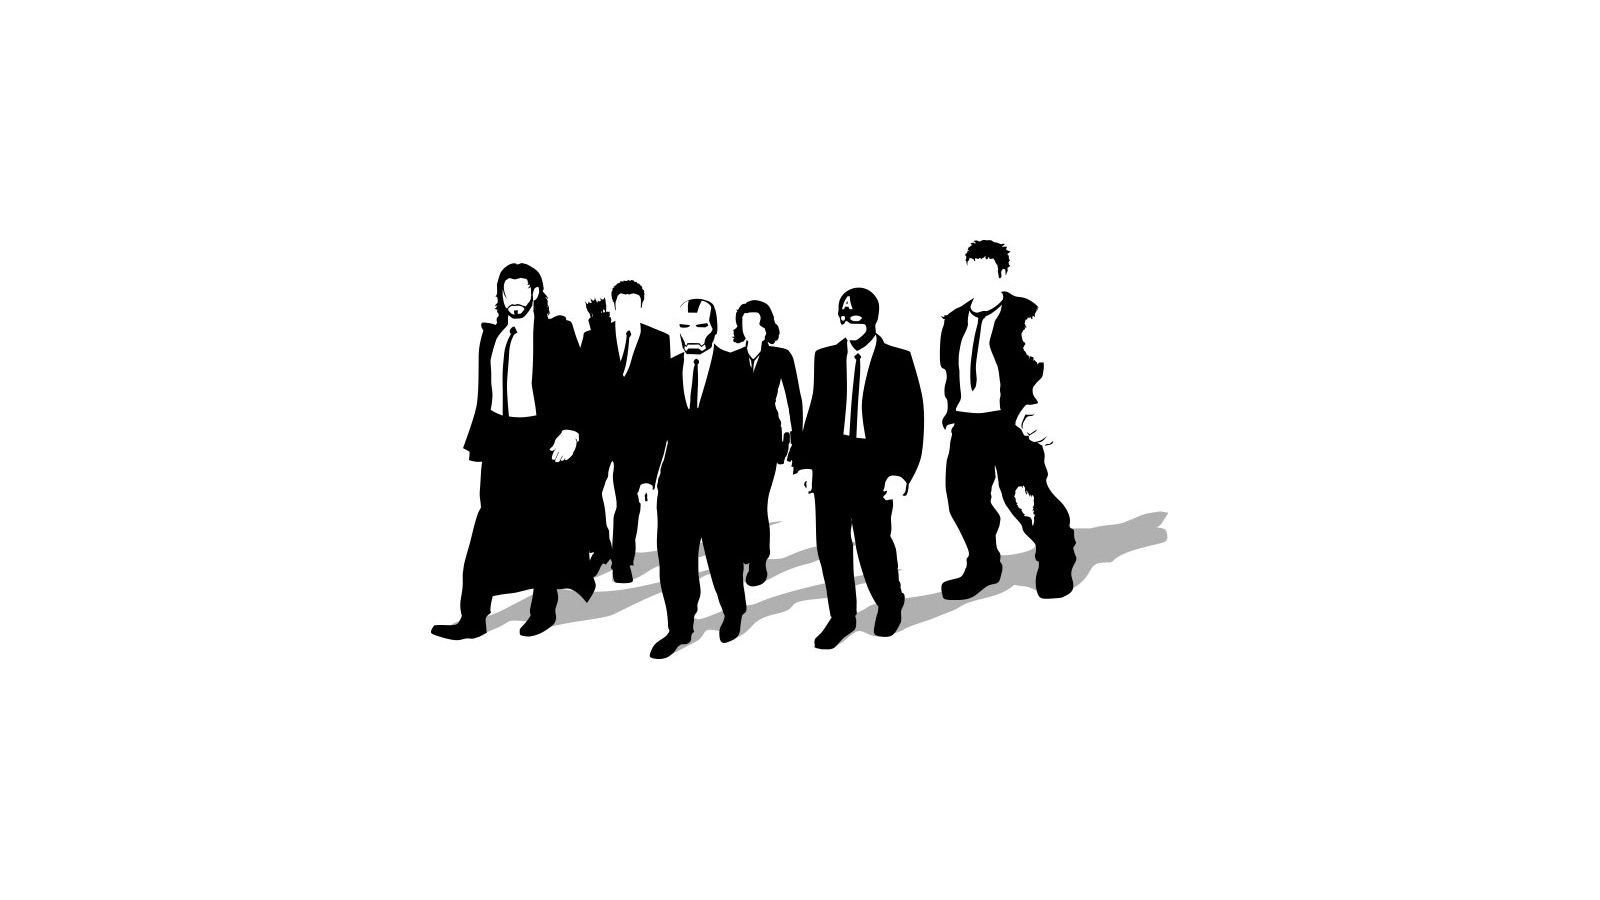 Black and white minimalistic funny reservoir dogs the avengers crossovers the avengers movie white free desktop background and wallpaper